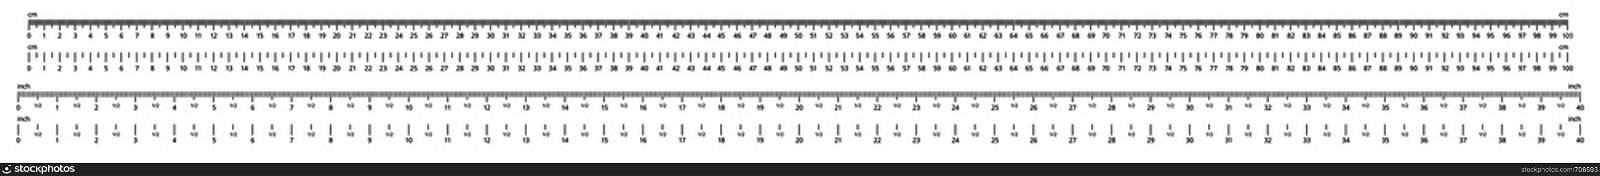 Ruler scale. Measurable scales, 100 centimeters and 40 inches rulers. Geometric engineer tool, school measured ruled cm gradation meter vector illustration. Ruler scale. Measurable scales, 100 centimeters and 40 inches rulers vector illustration